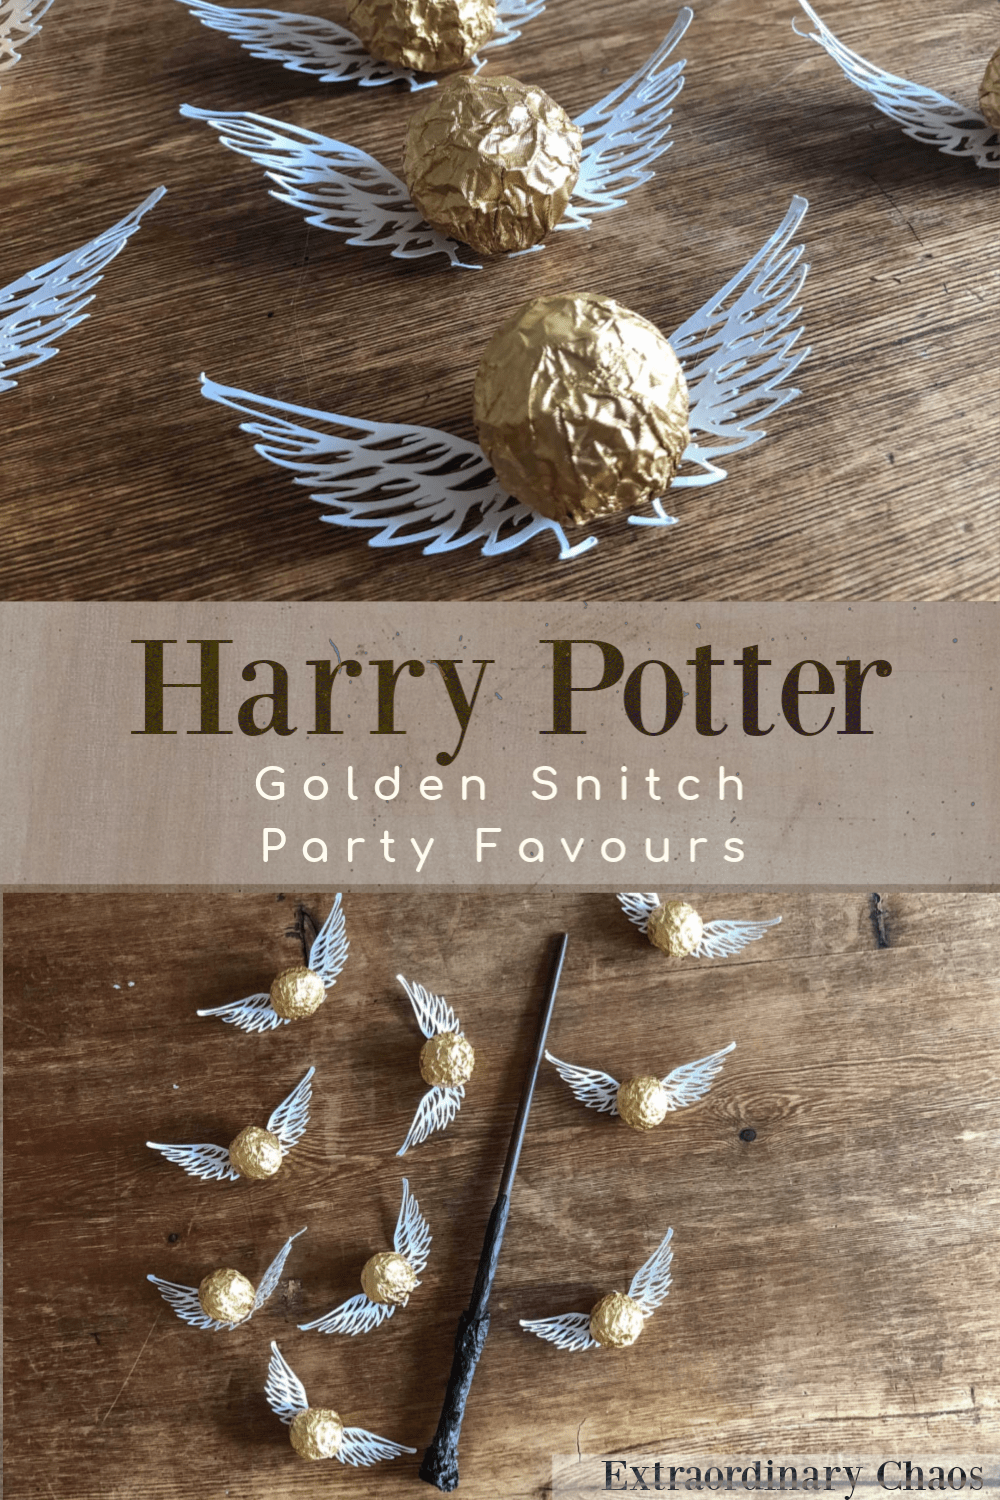 Harry Potter themed parties, Quidditch, Golden Snitch party favours